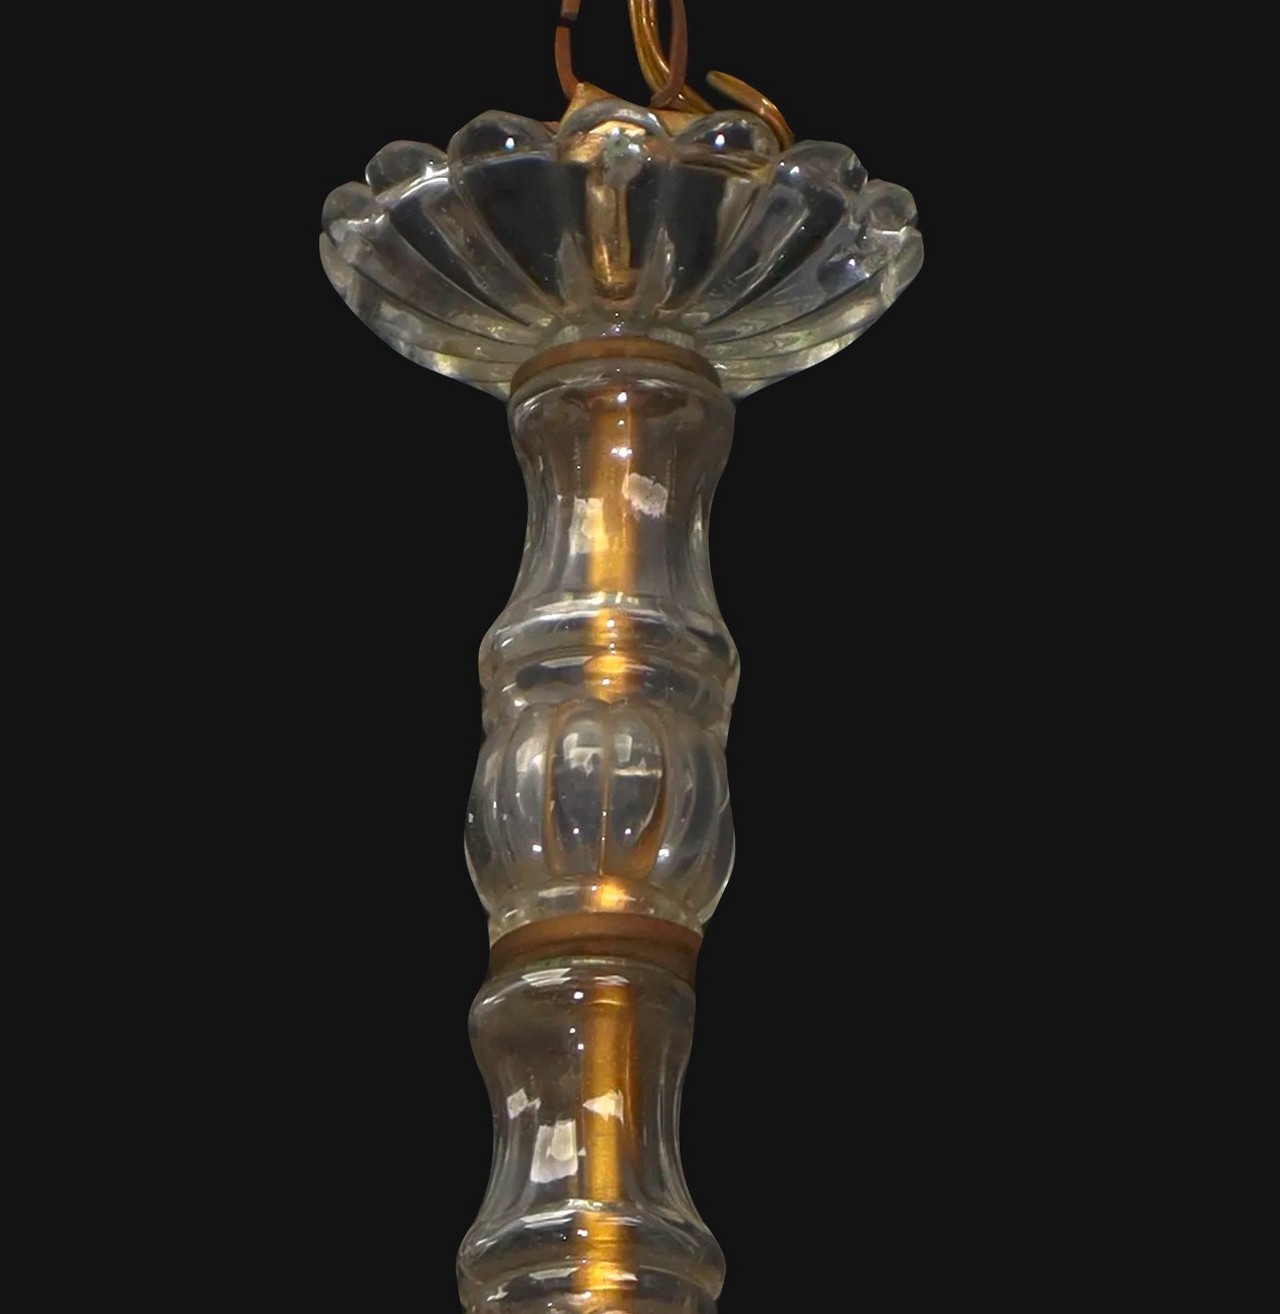 Maria Teresa chandelier with 5 lights in Murano glass, 20th century - Image 3 of 3